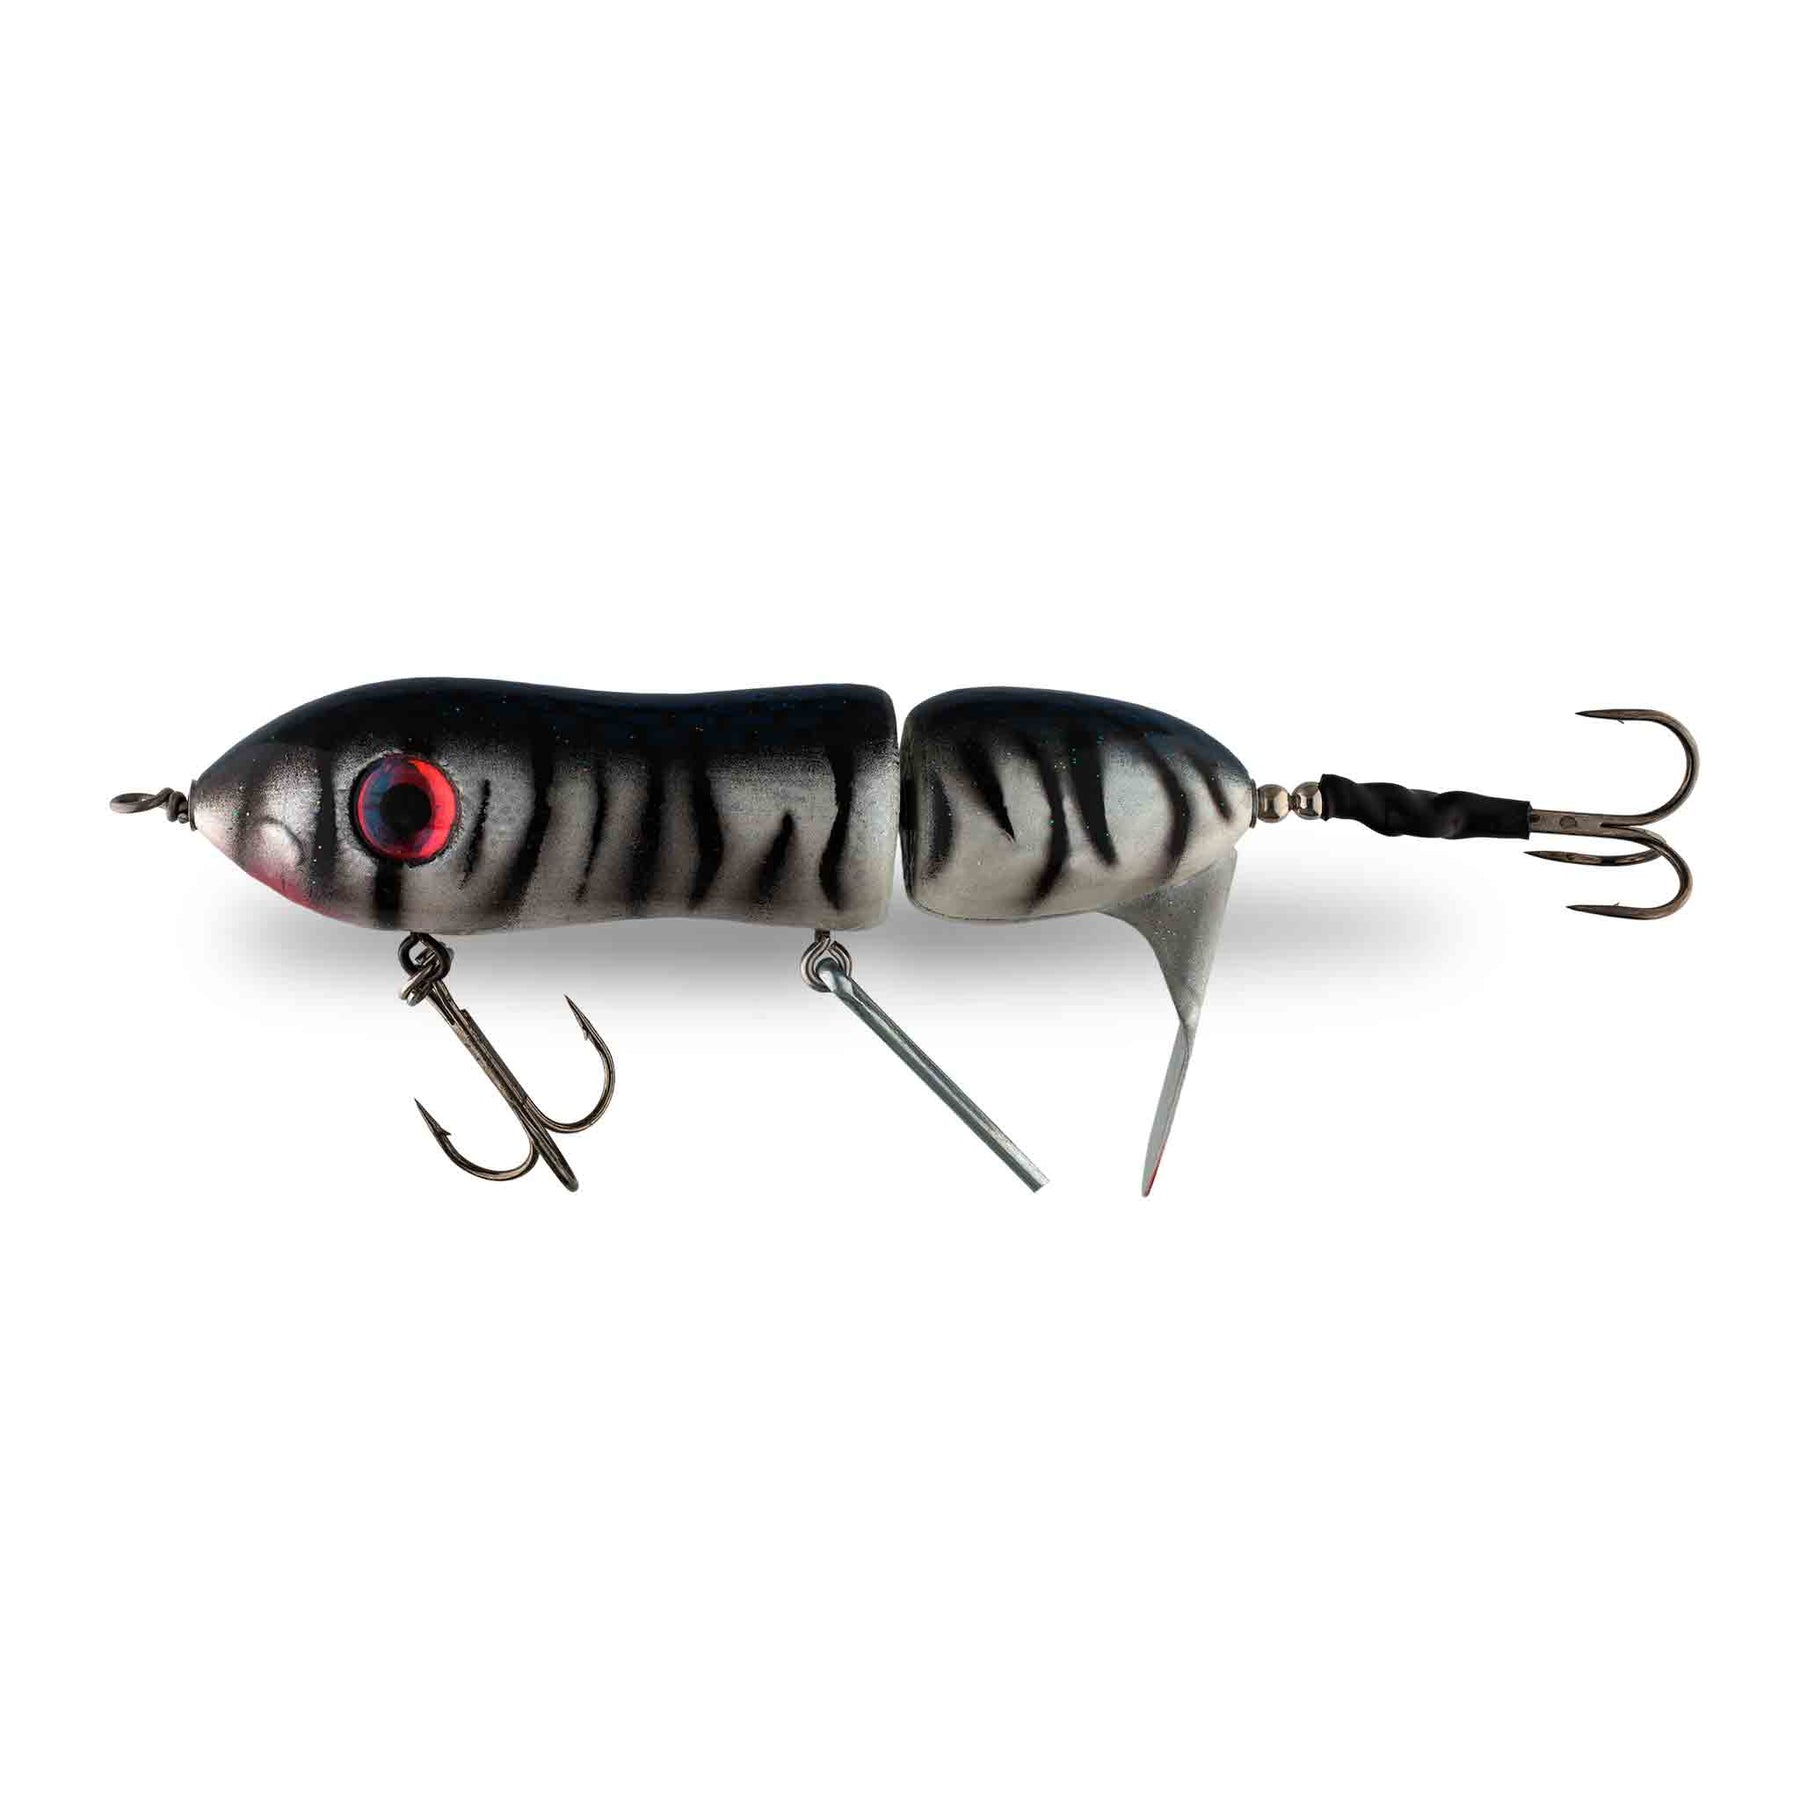 View of Topwater Big Mama Twis'td Sis'tr Clicker Propbait Charged Cisco available at EZOKO Pike and Musky Shop